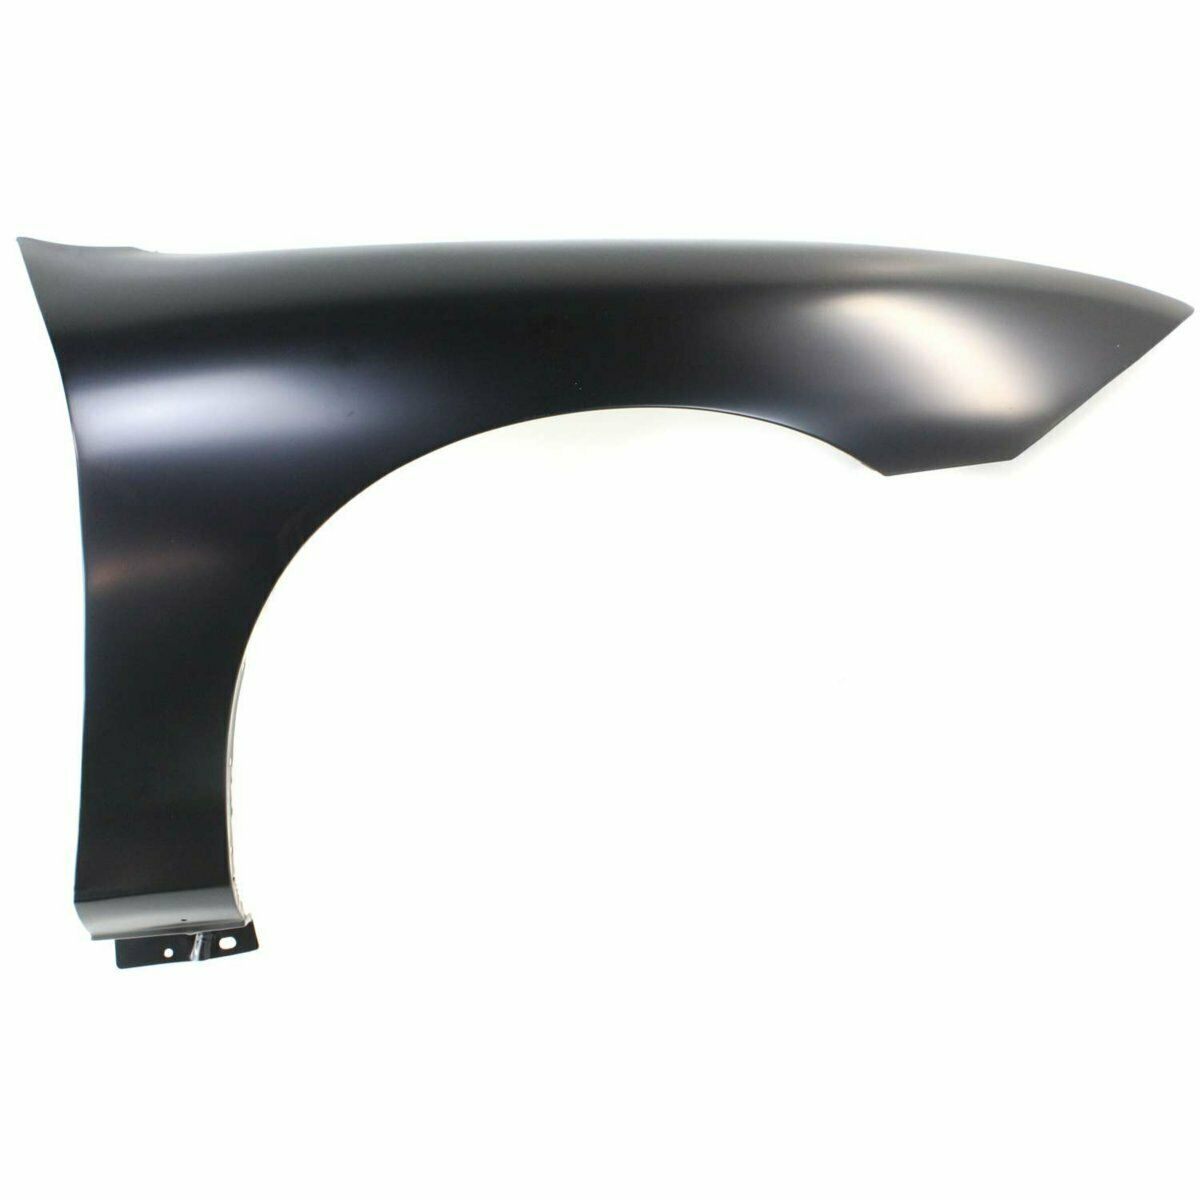 2000-2005 Chevy Cavalier Right Fender Painted to Match